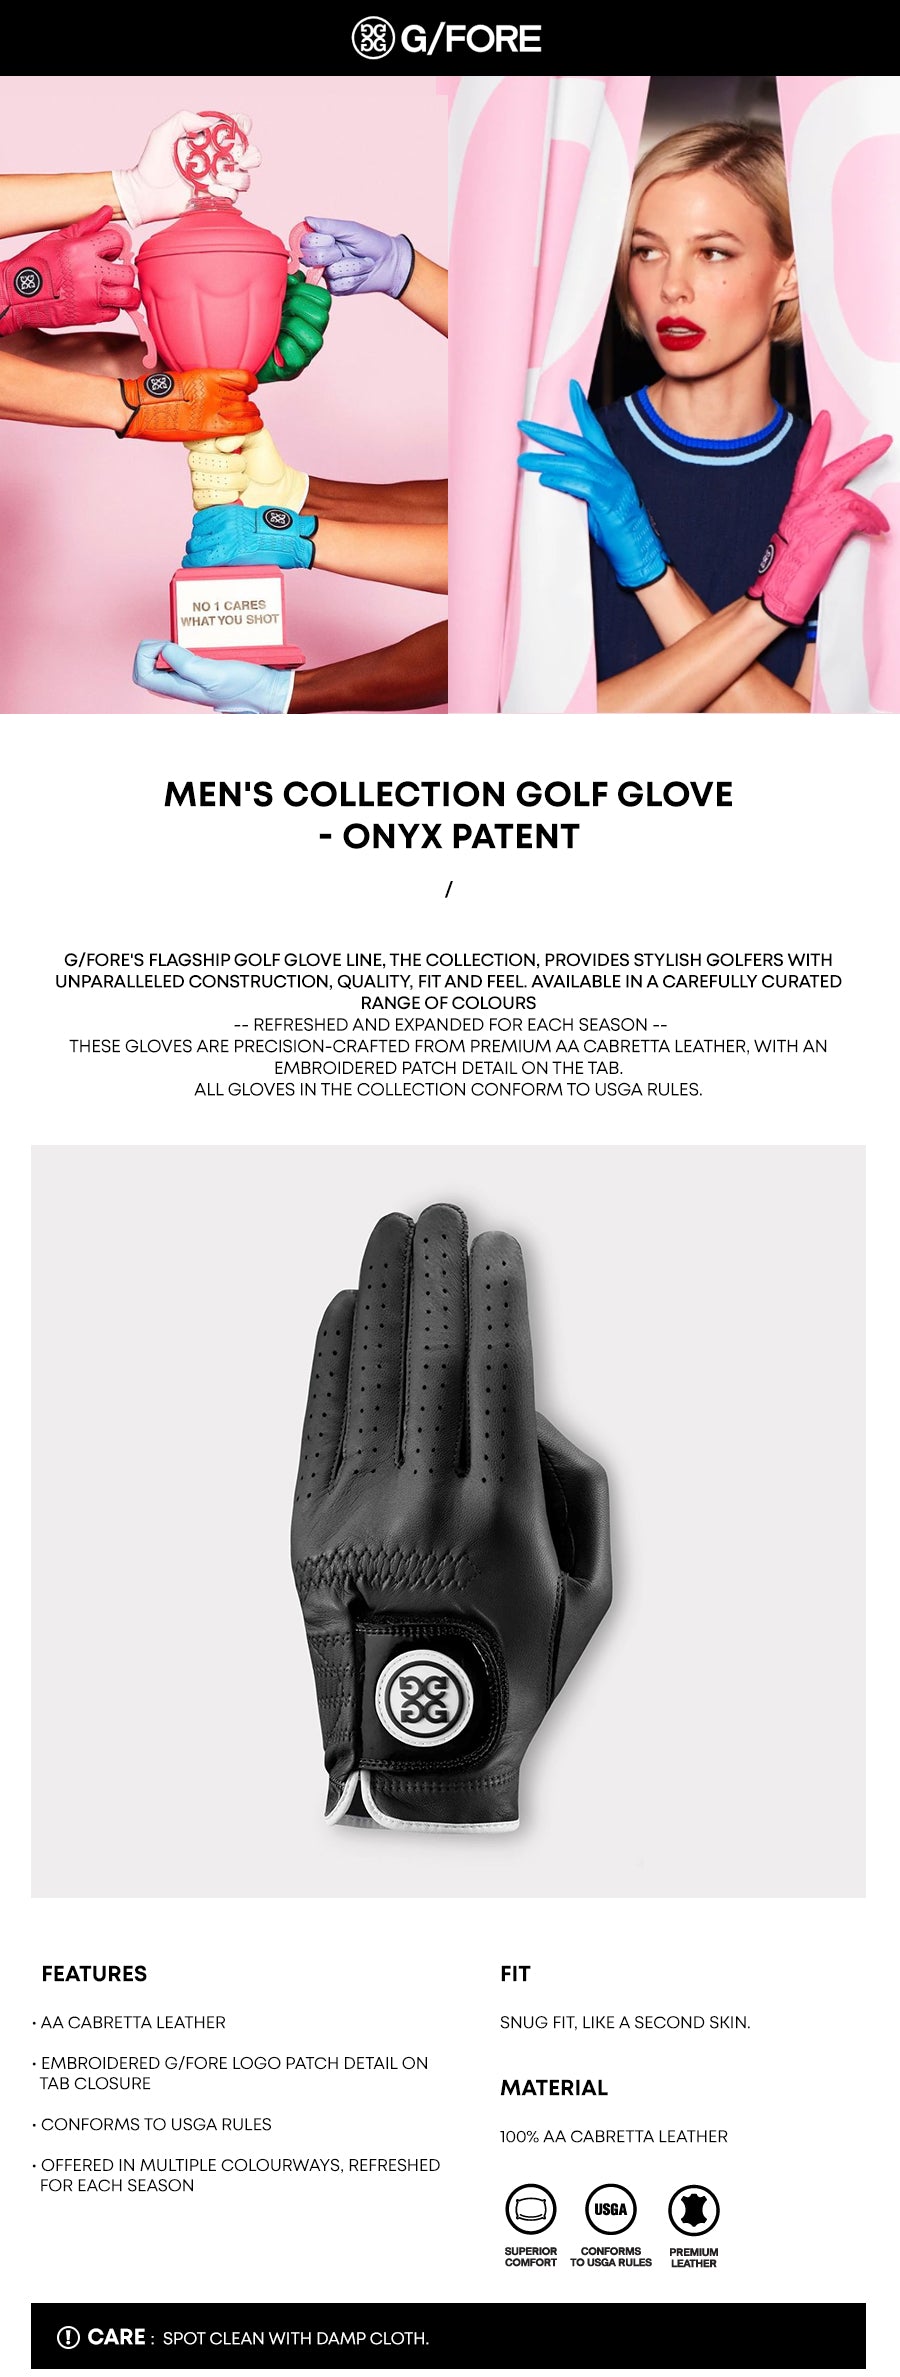 gfore-mens-collection-golf-glove-onyx-patent